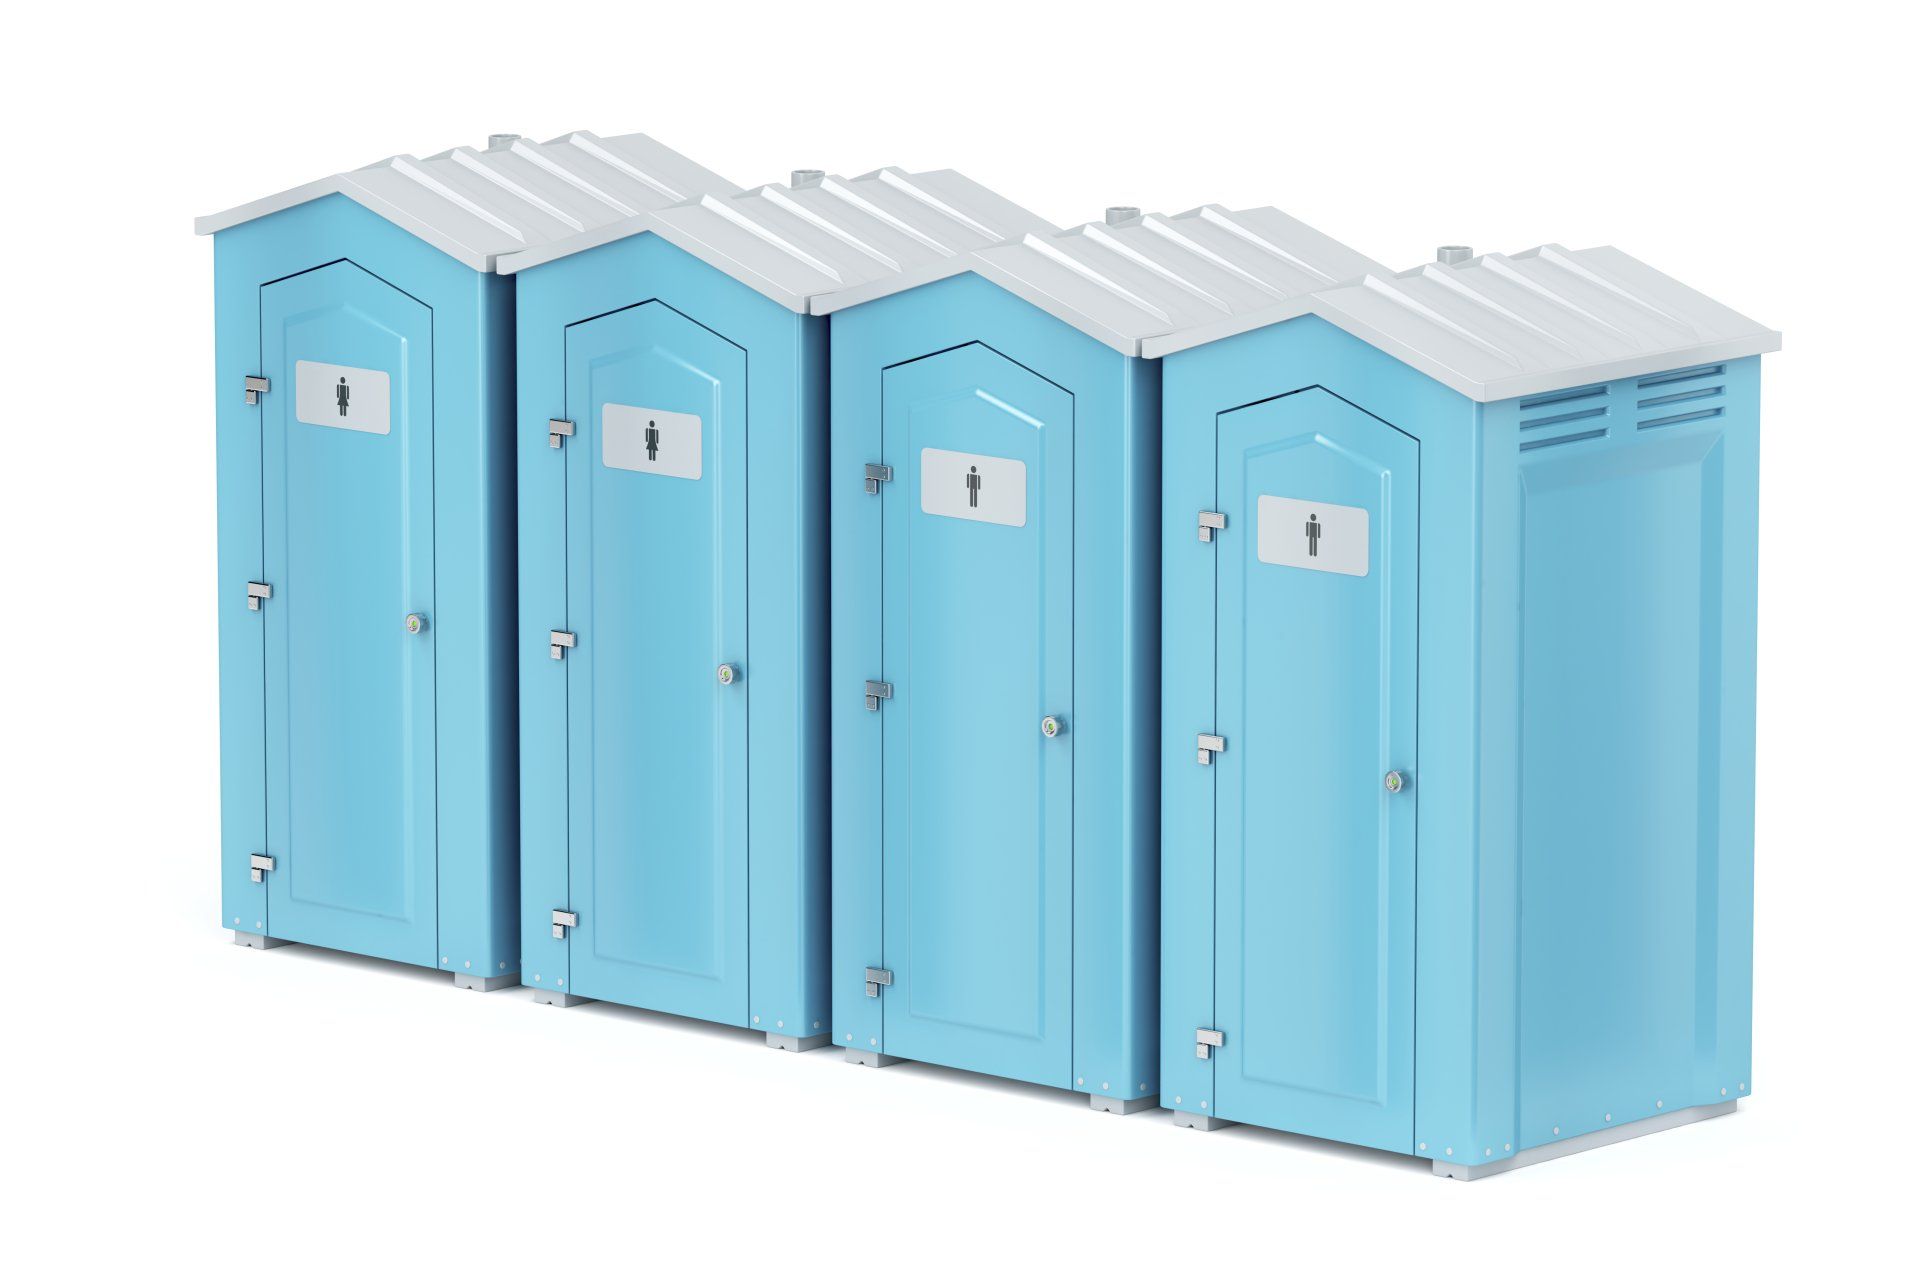 Rent portable toilets for your next sporting event